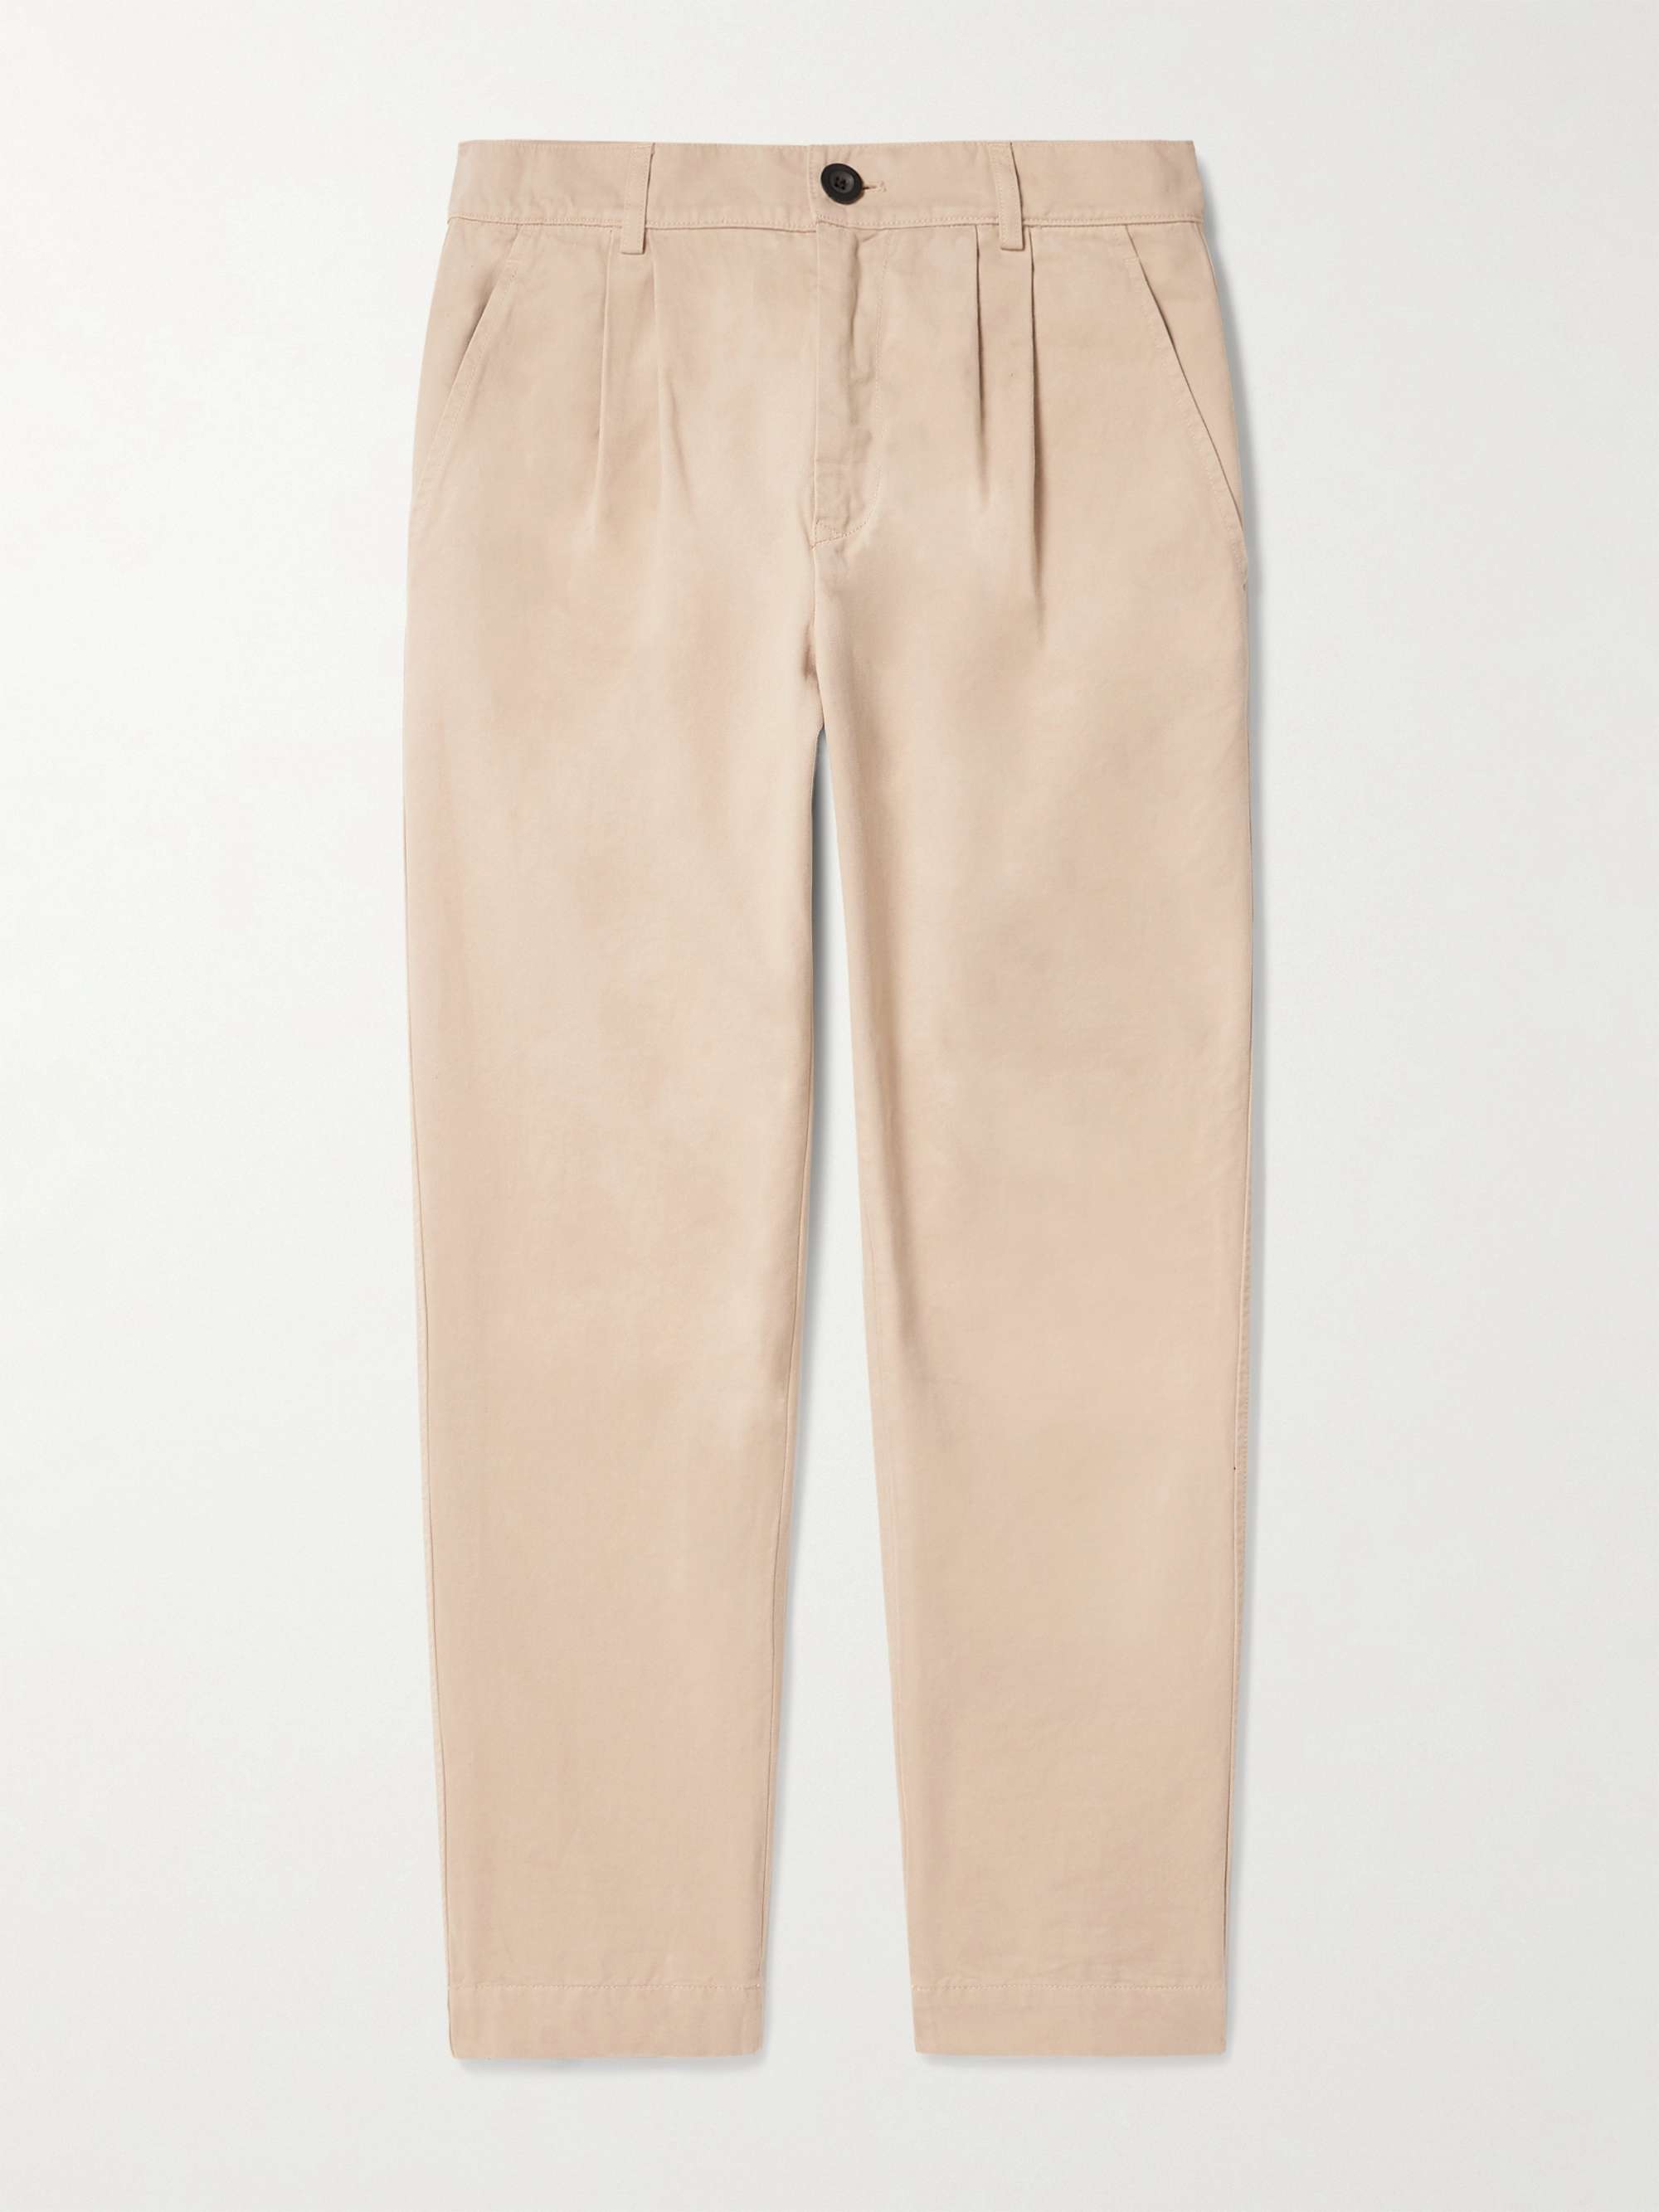 MR P. Tapered Pleated Cotton-Twill Trousers for Men